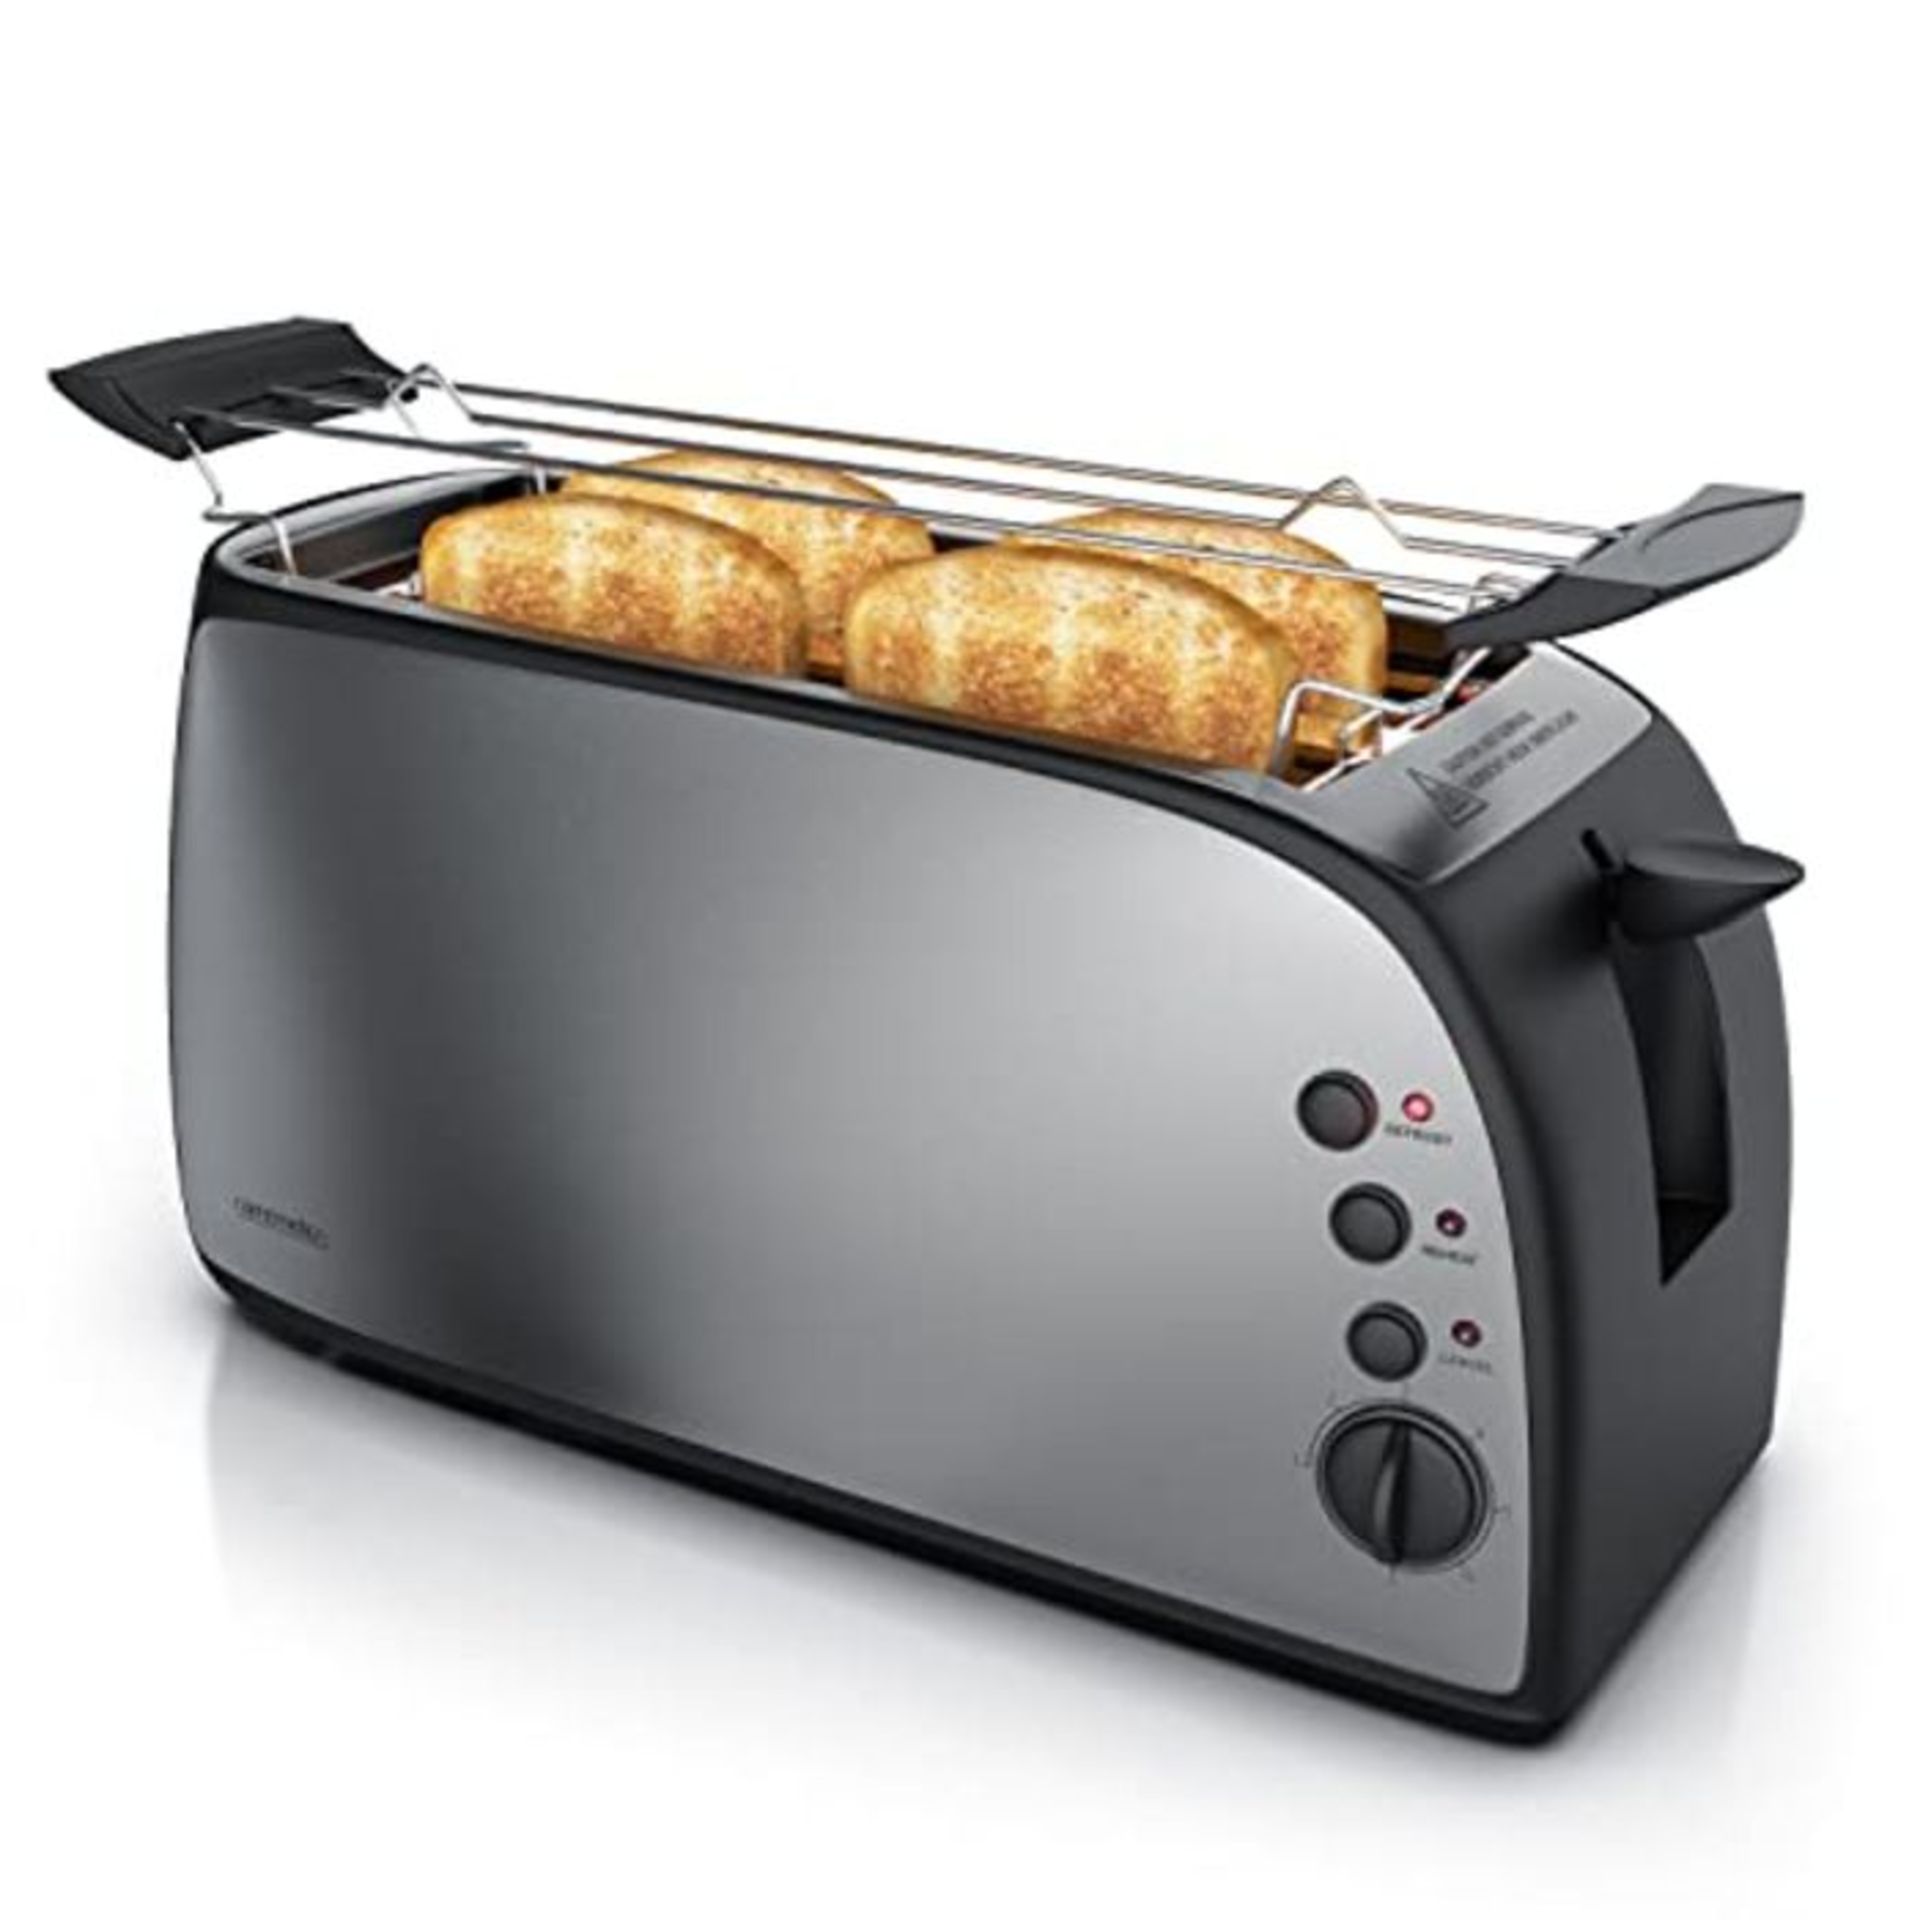 Arendo - Automatic toaster long slot - defrost function - heat-insulating housing - re